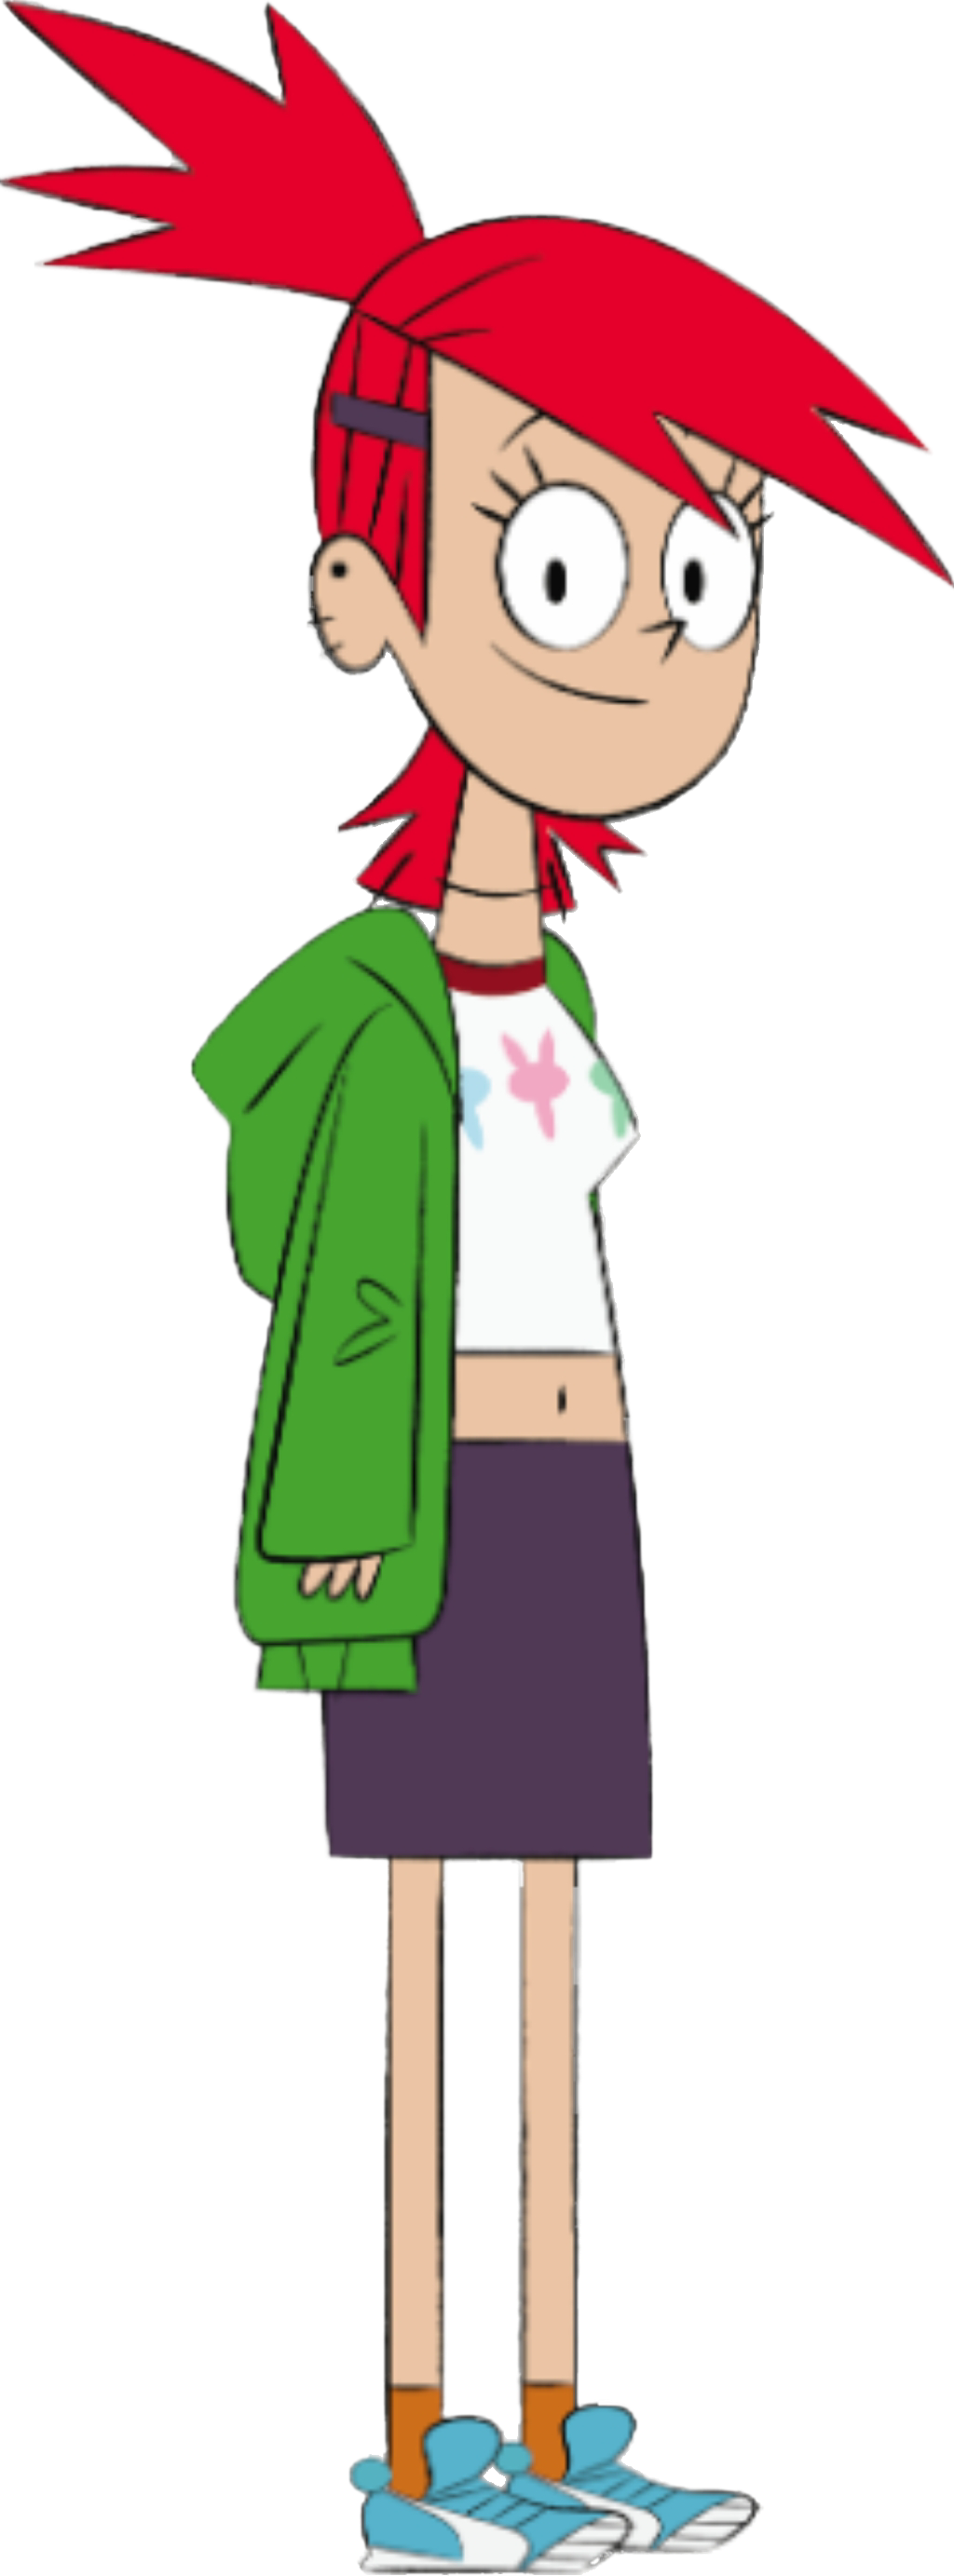 Frankie Foster Imagination Companions A Foster S Home For Imaginary Friends Wiki Fandom